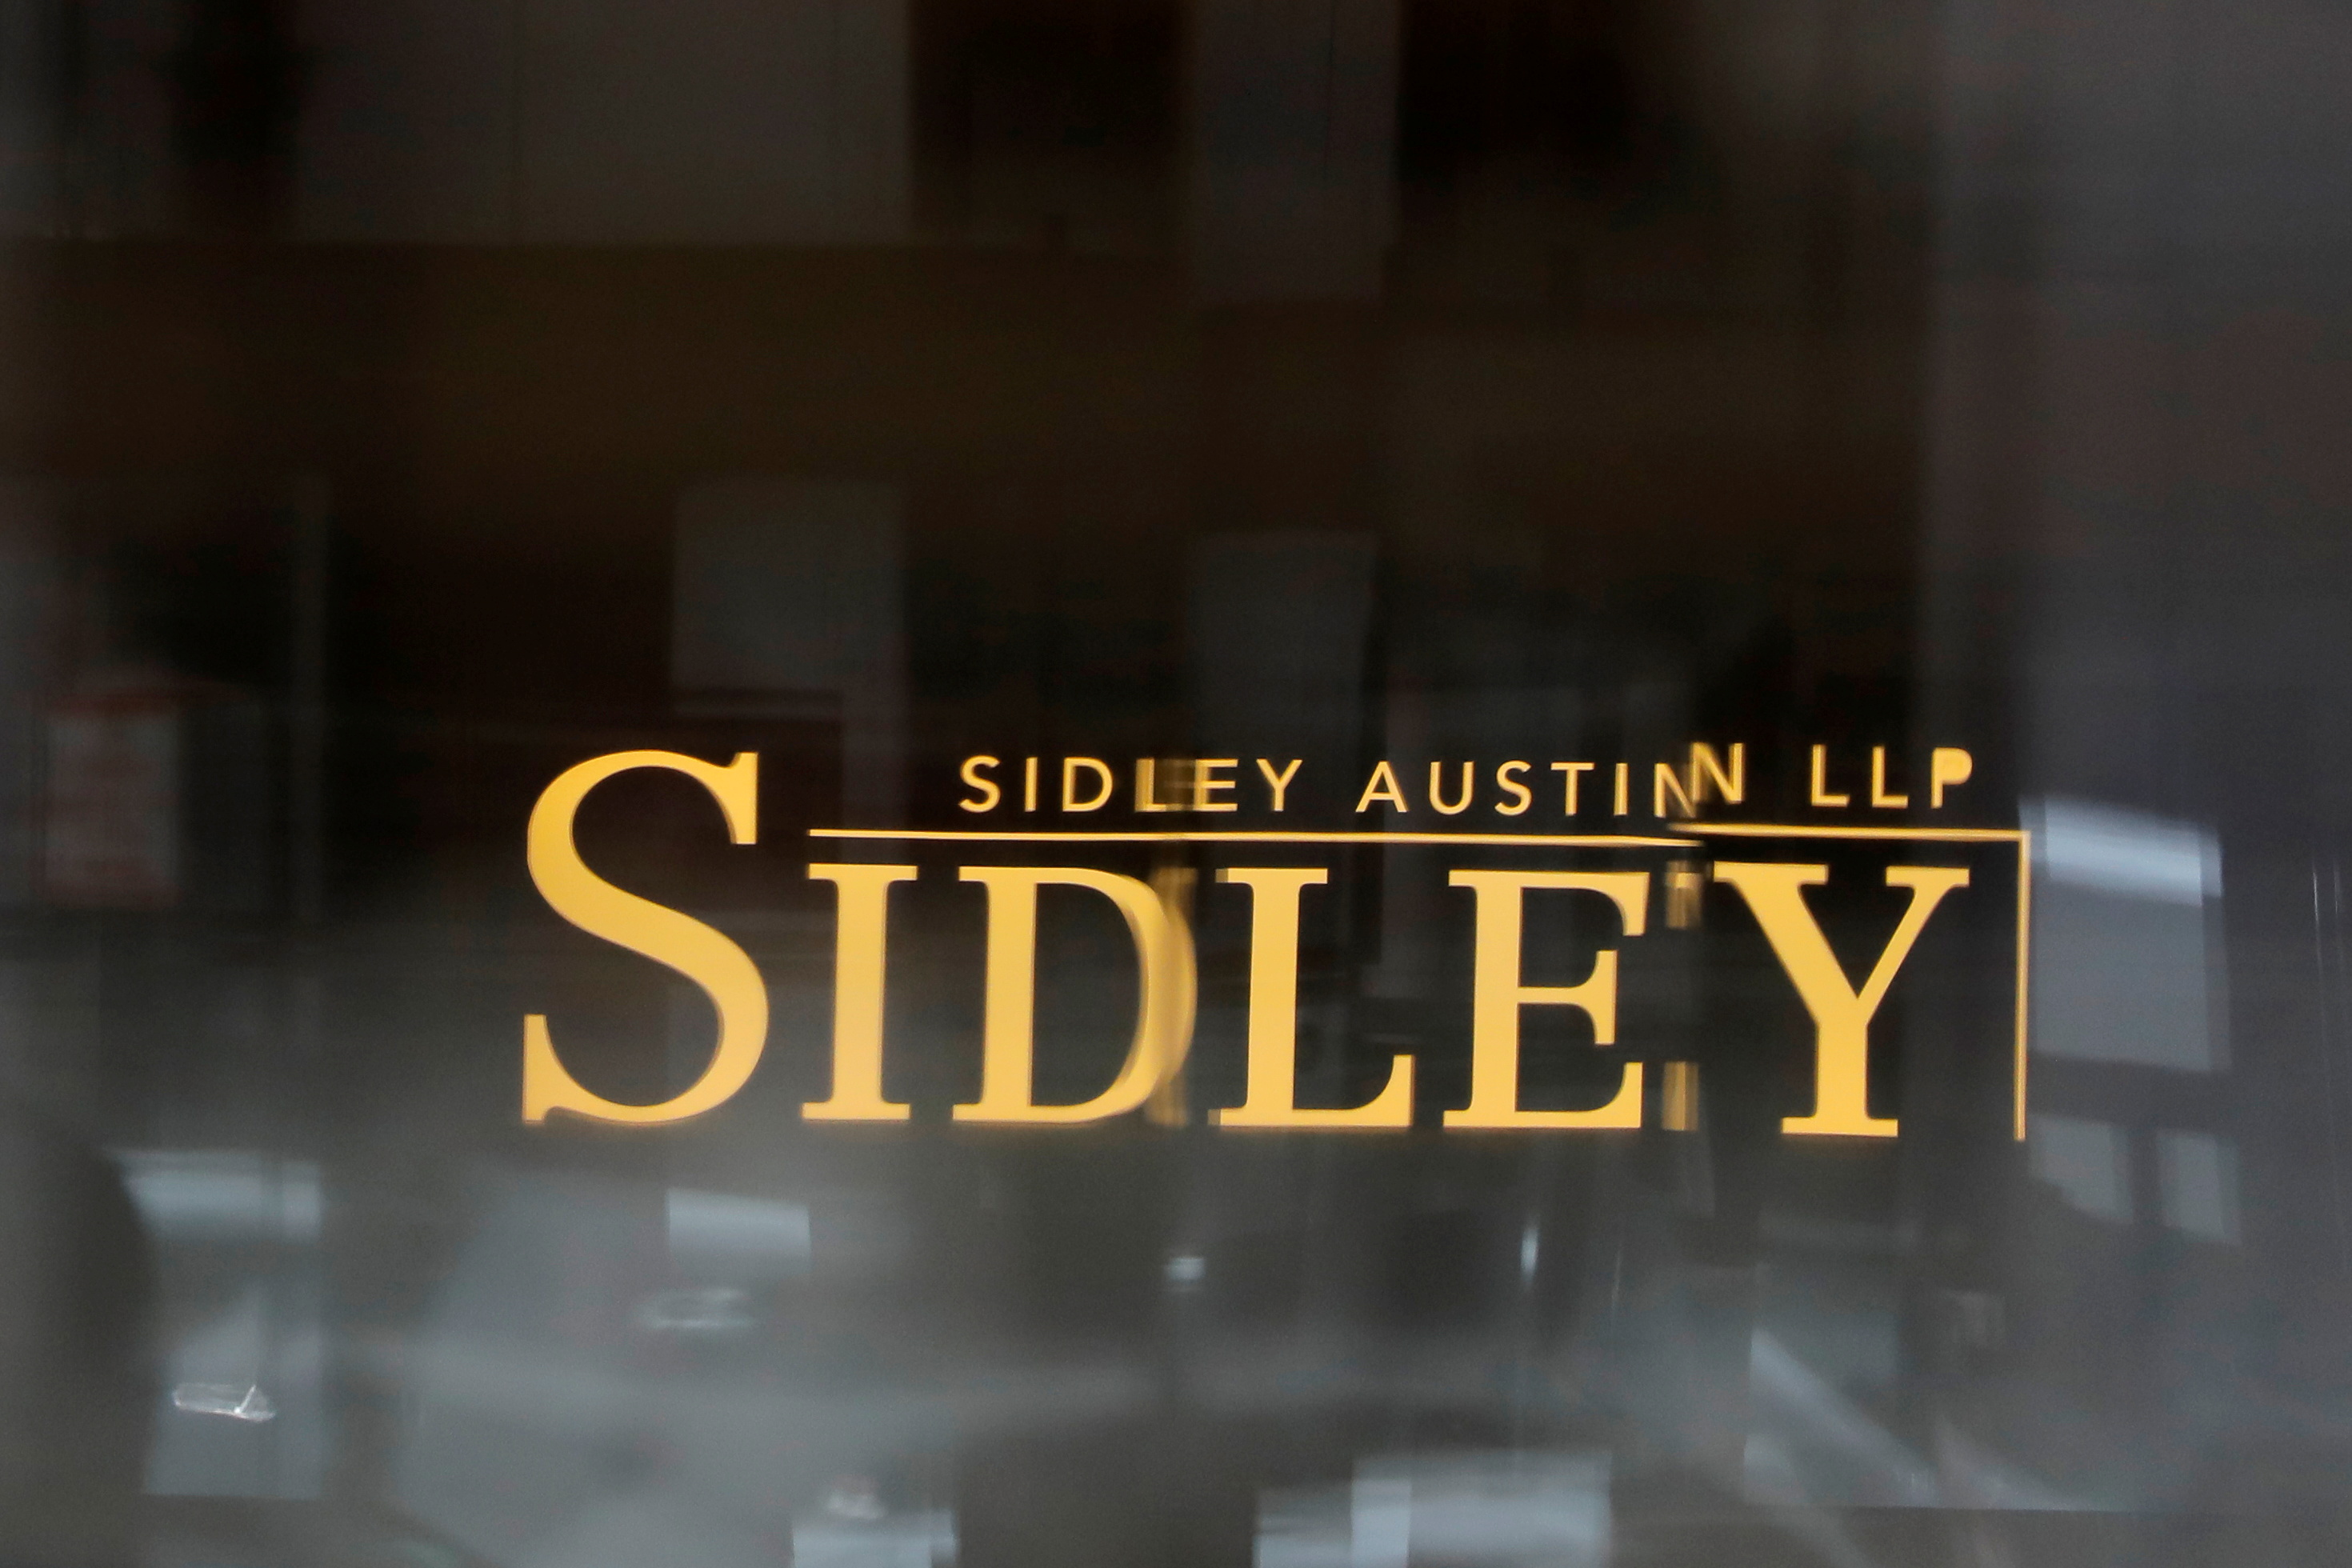  Sidley Austin legal offices in Washington, D.C.  REUTERS/Andrew Kelly